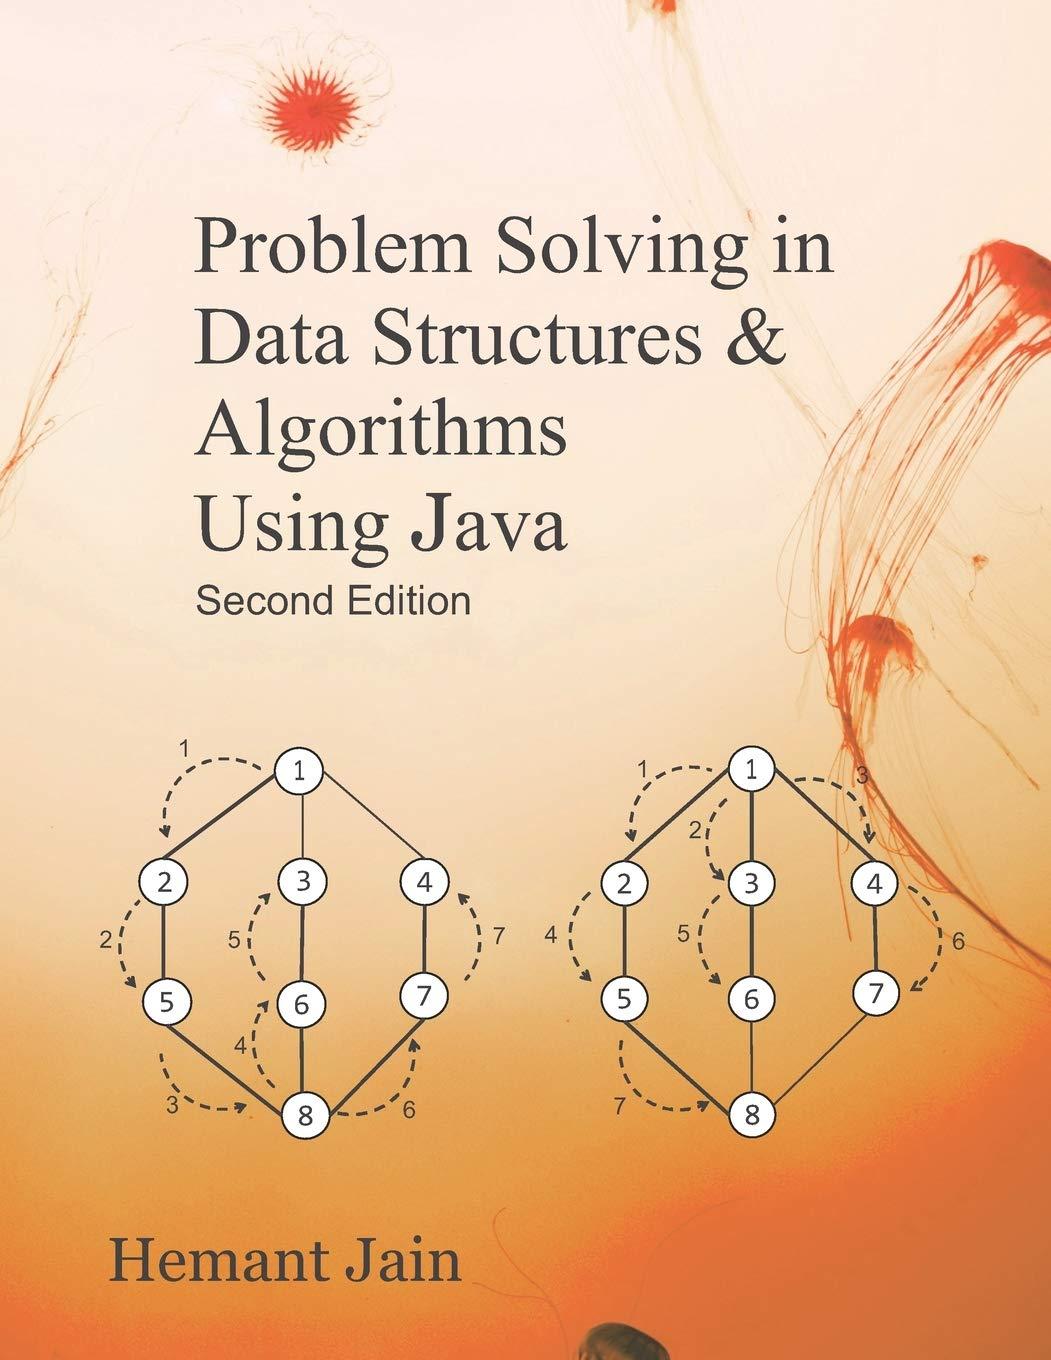 problem solving in data structures and algorithms using java 2nd edition hemant jain 1723982105, 9781723982101